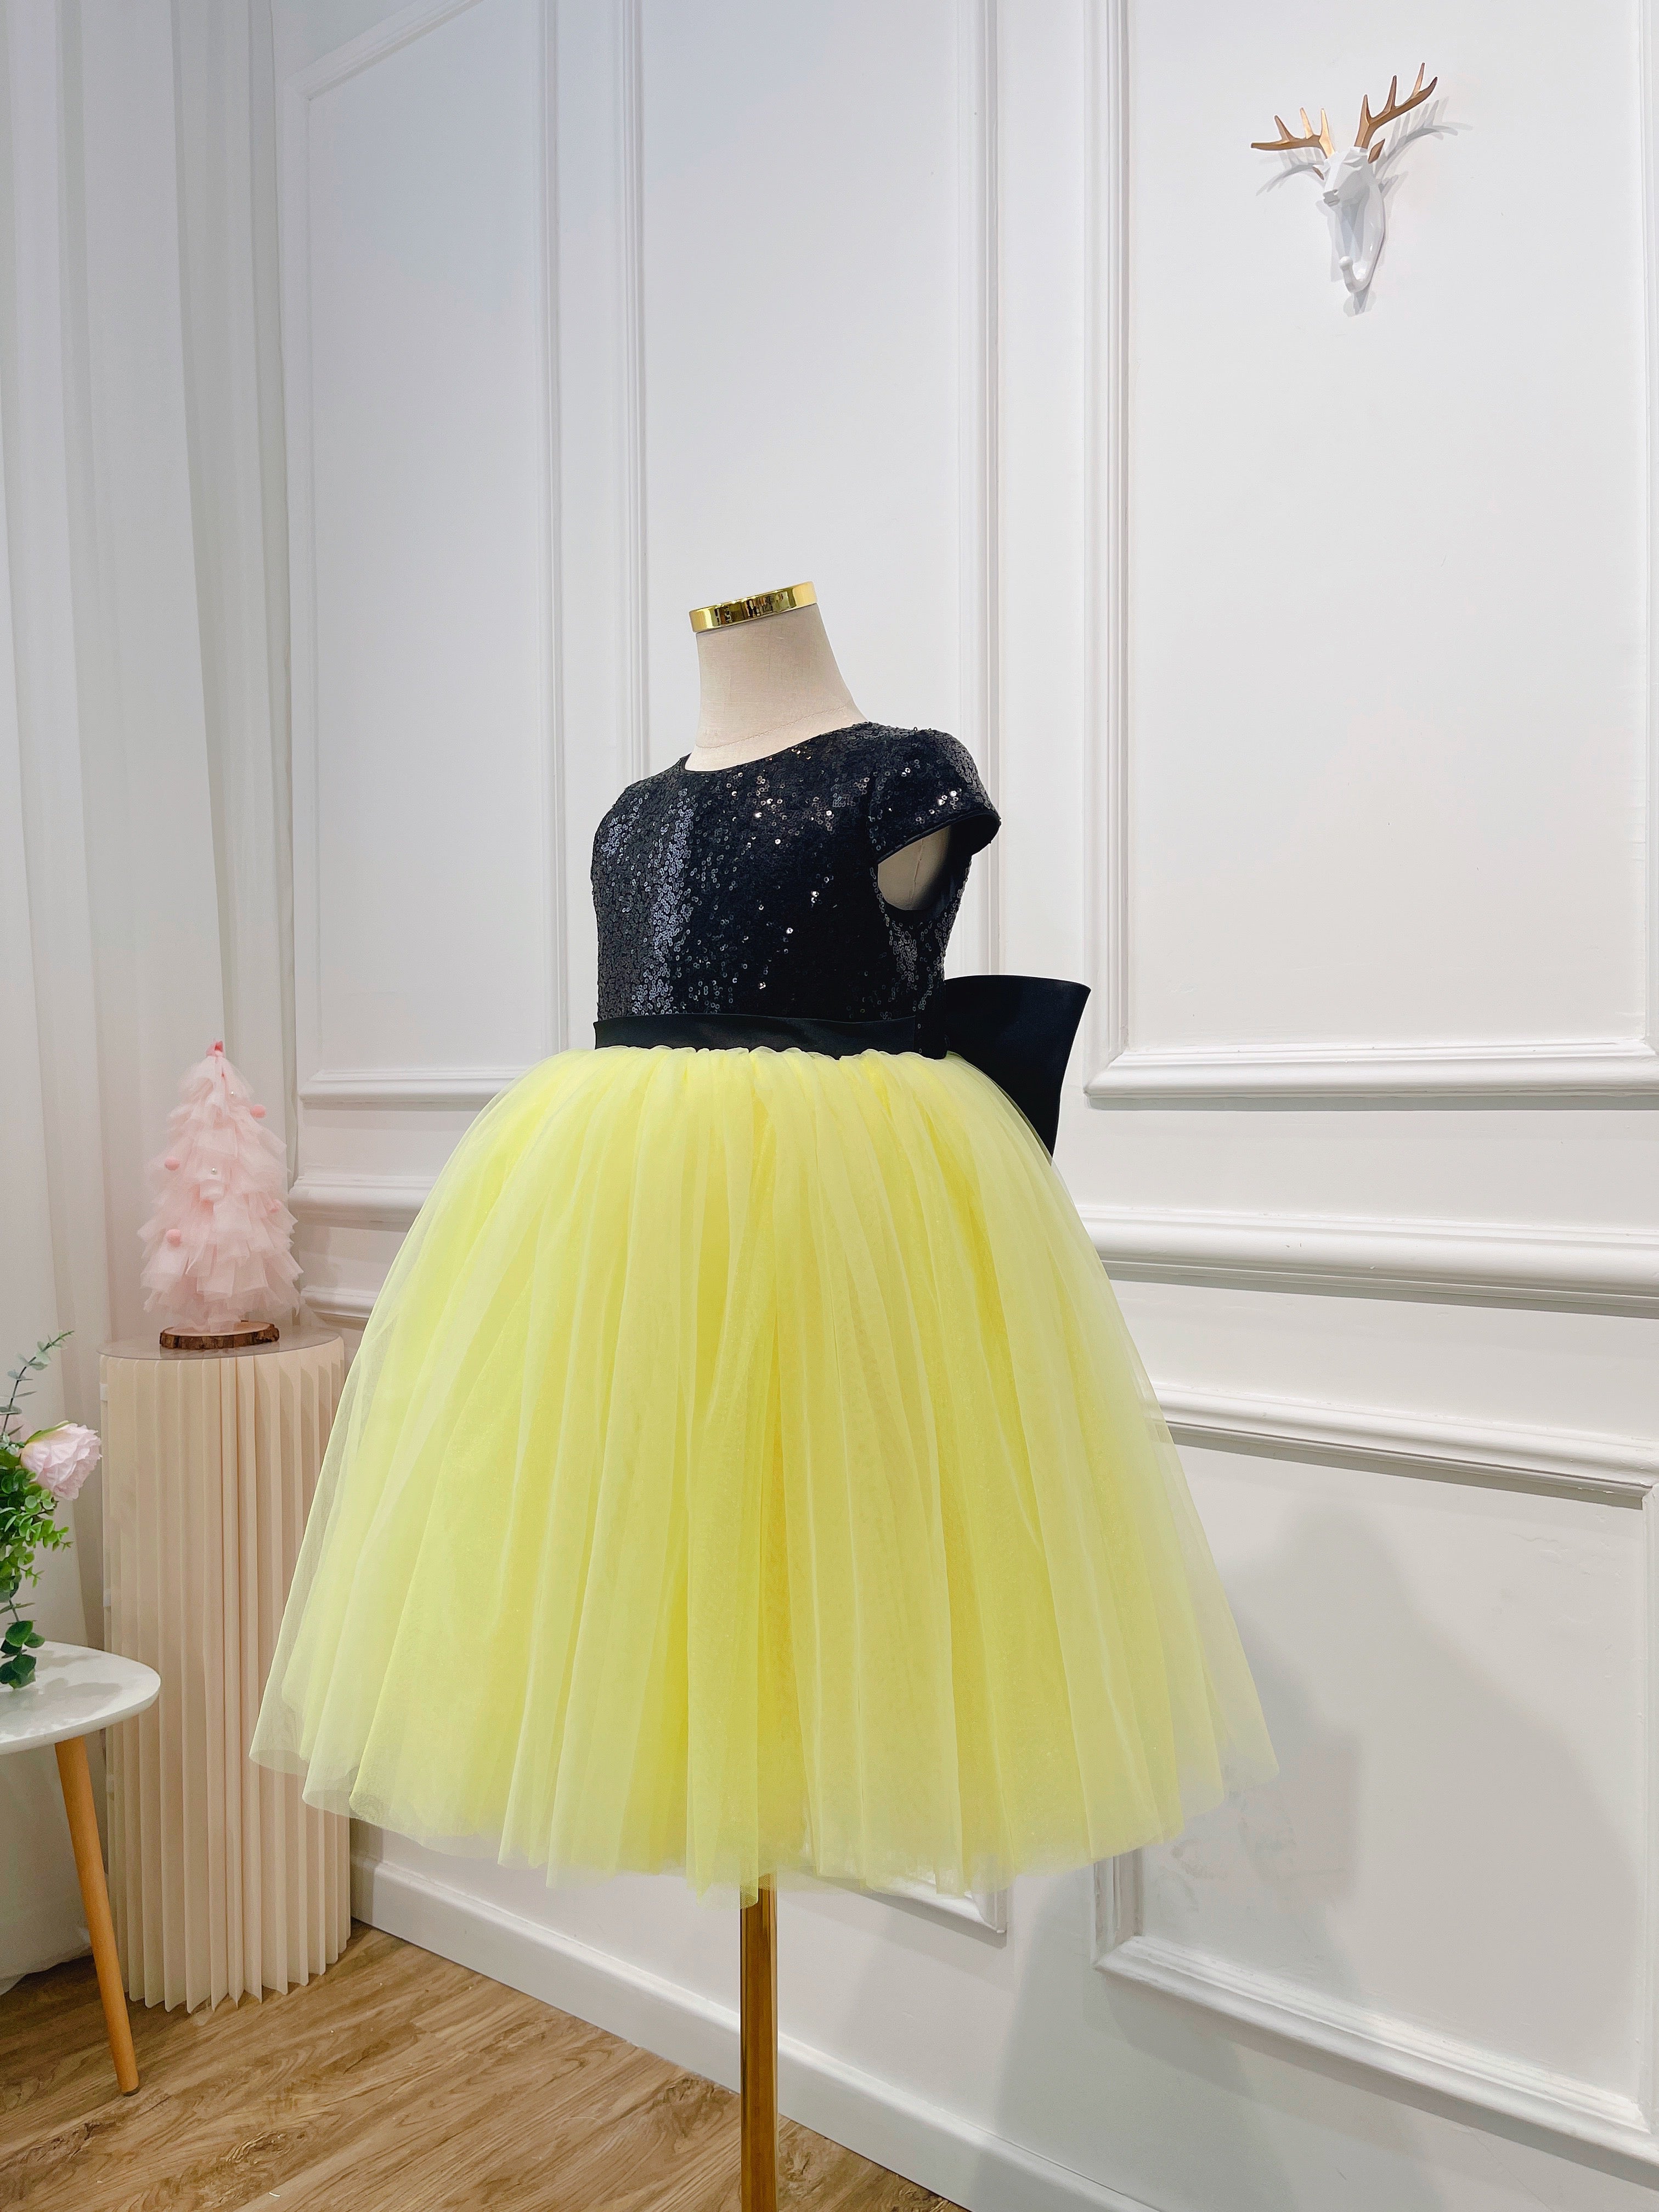 The top black and the bottom yellow dress skirt